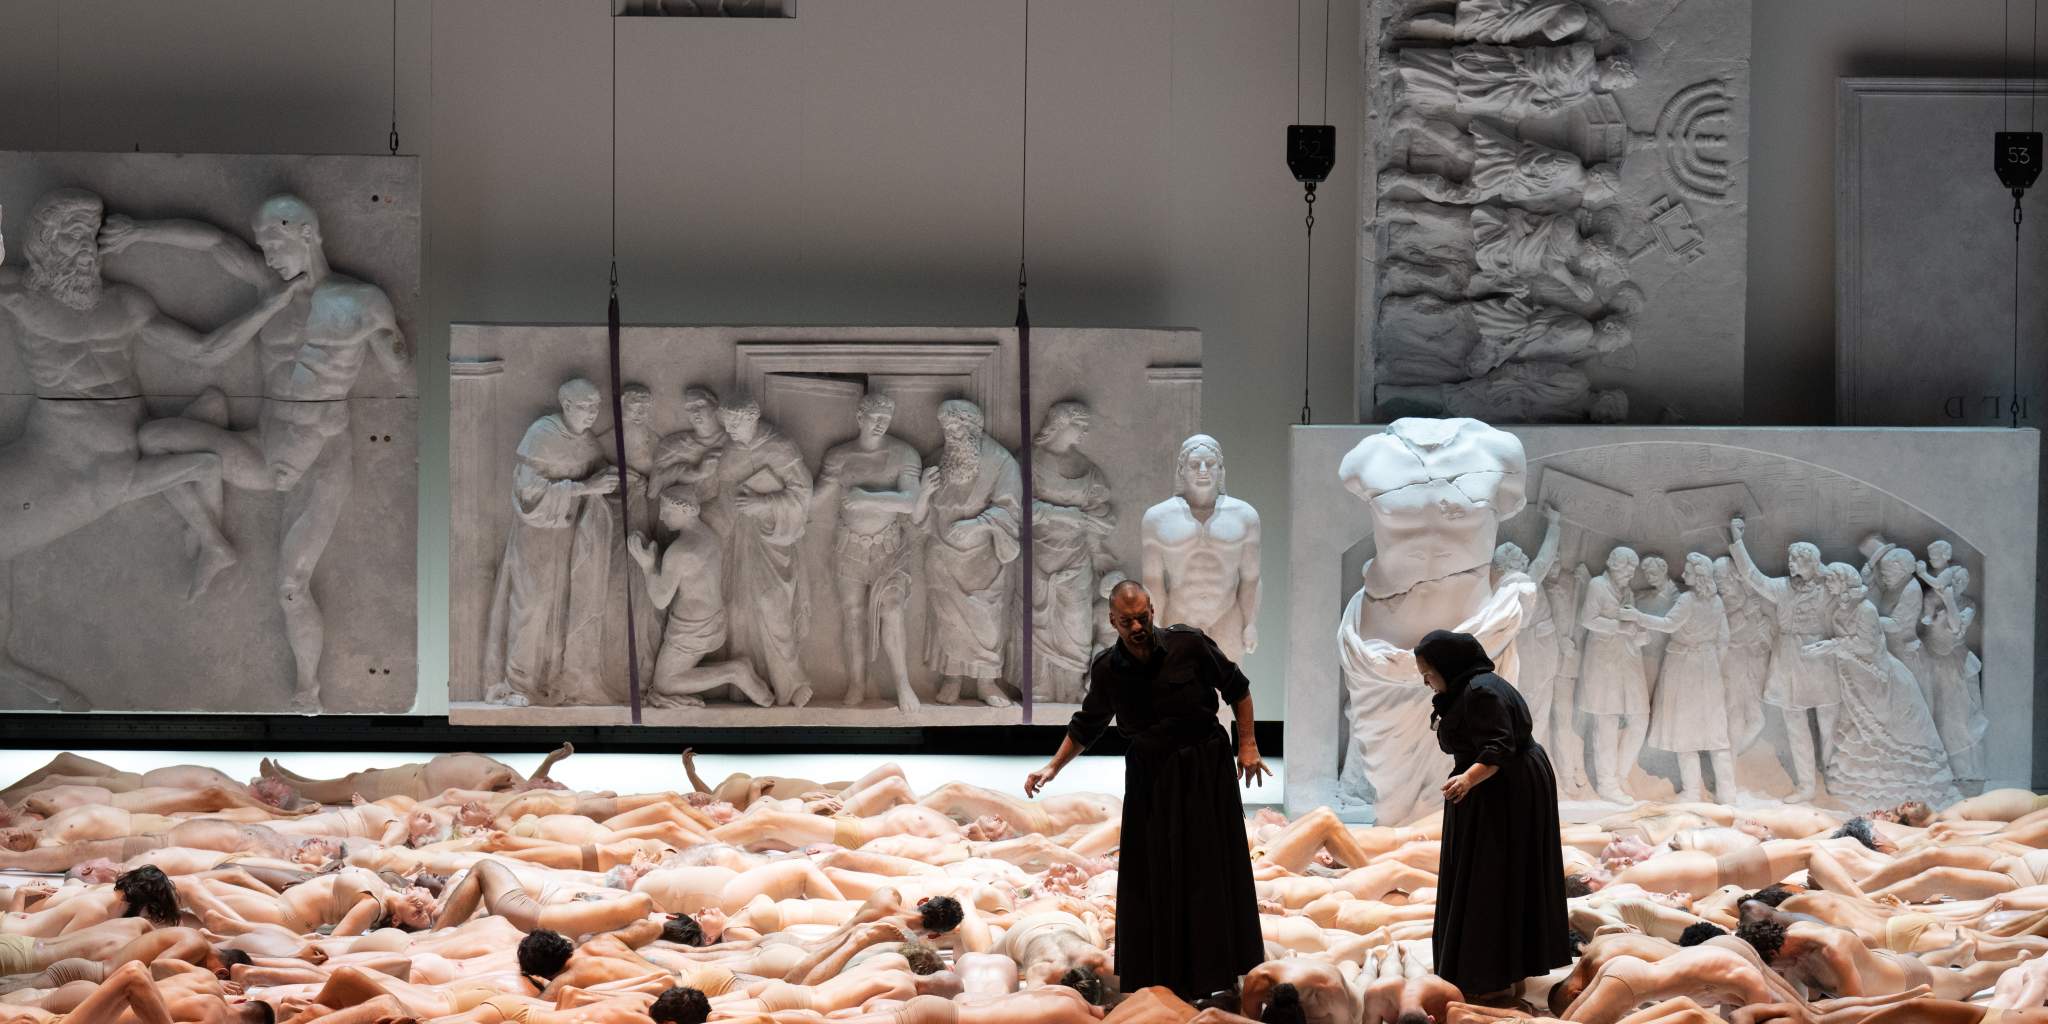 Massacre at the opera? (Or just another Wagner Ring)